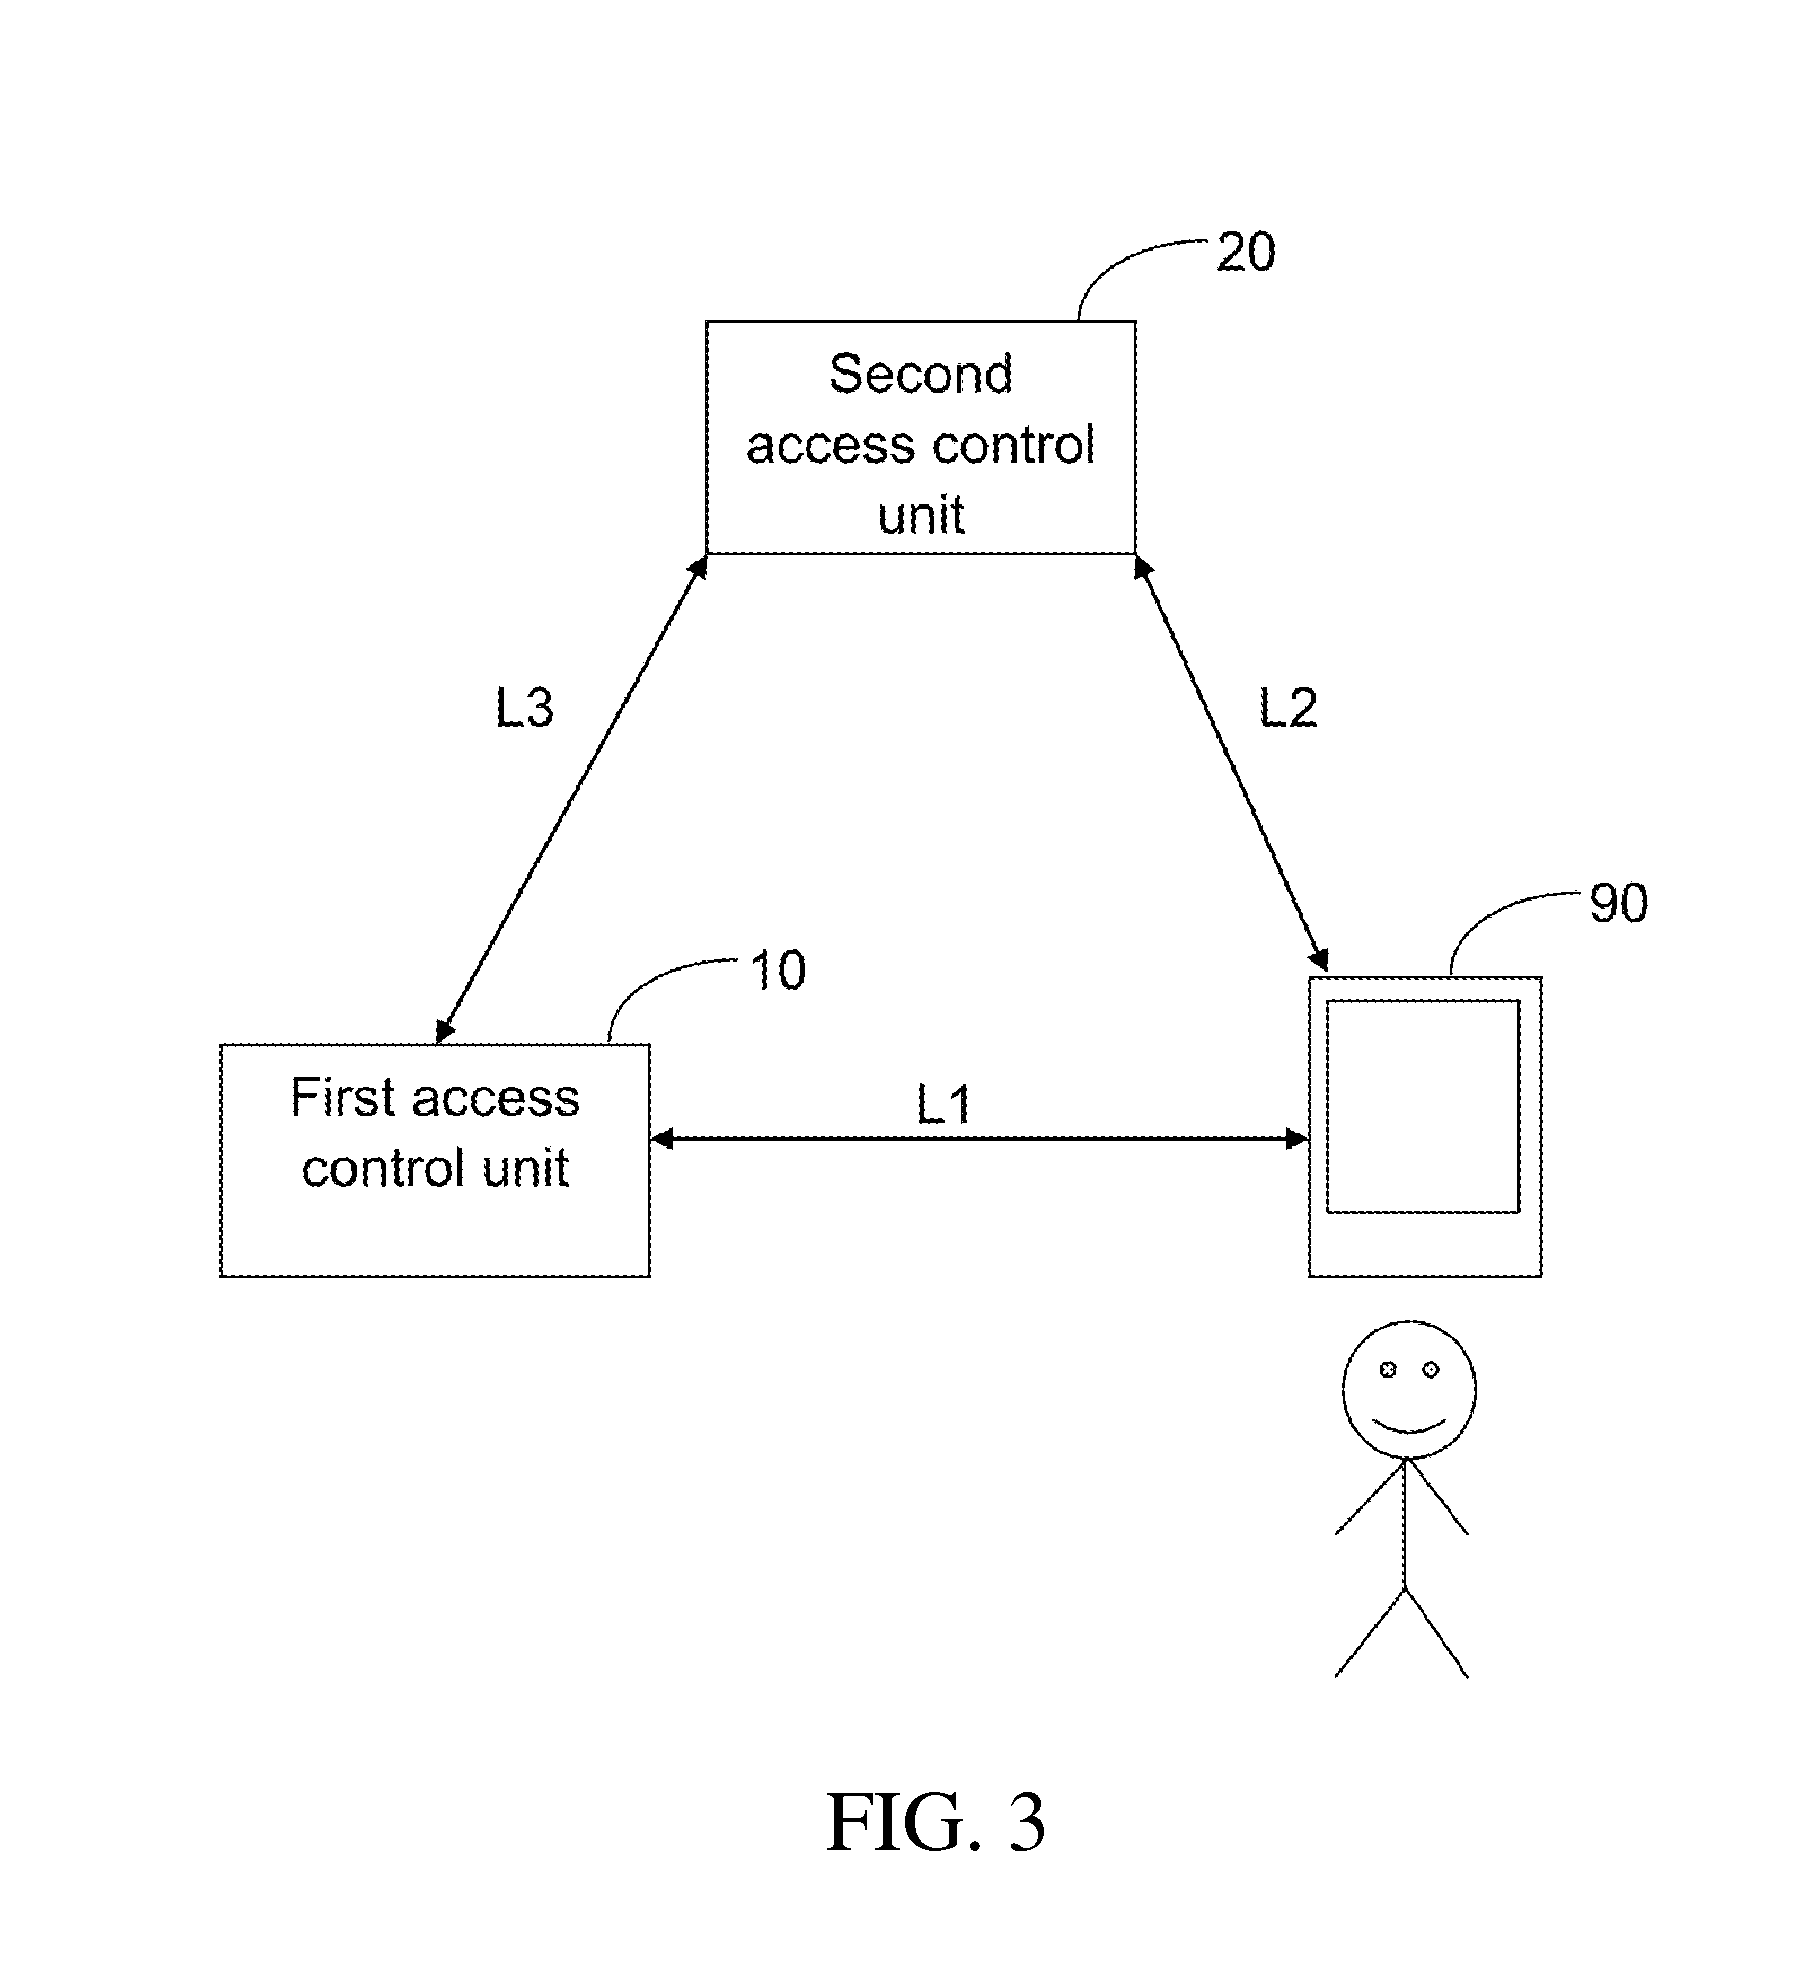 System, apparatus, and method for access control